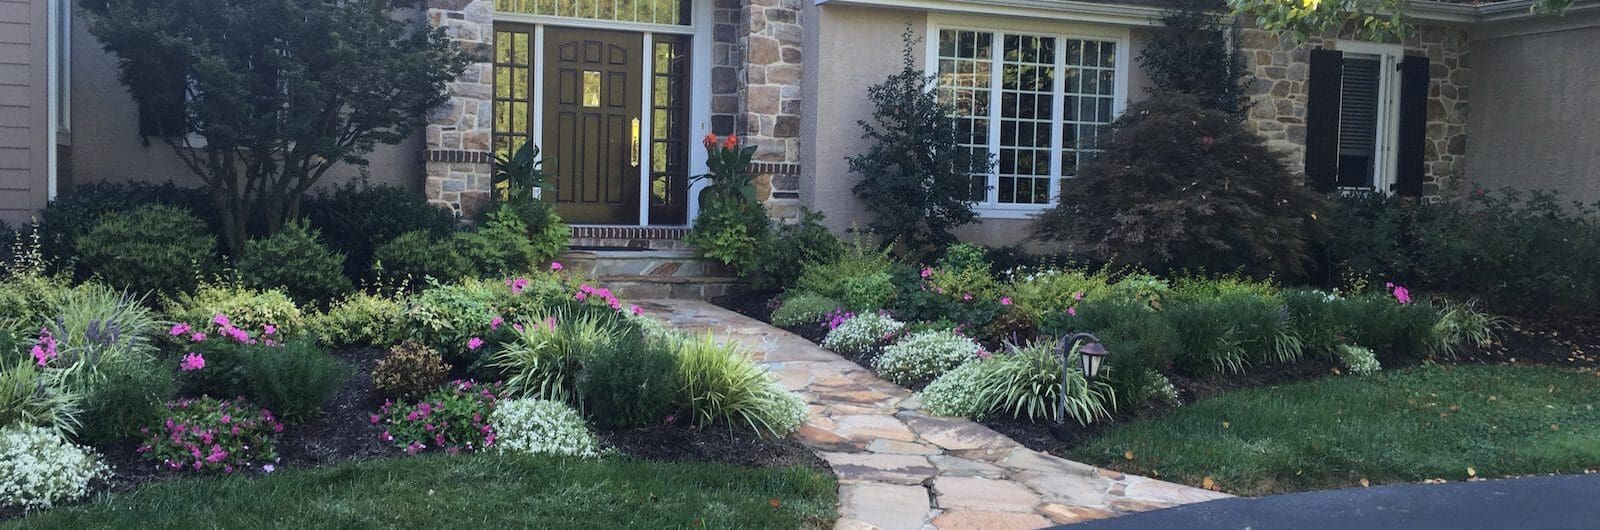 Chadds Ford, PA Landscaping Services